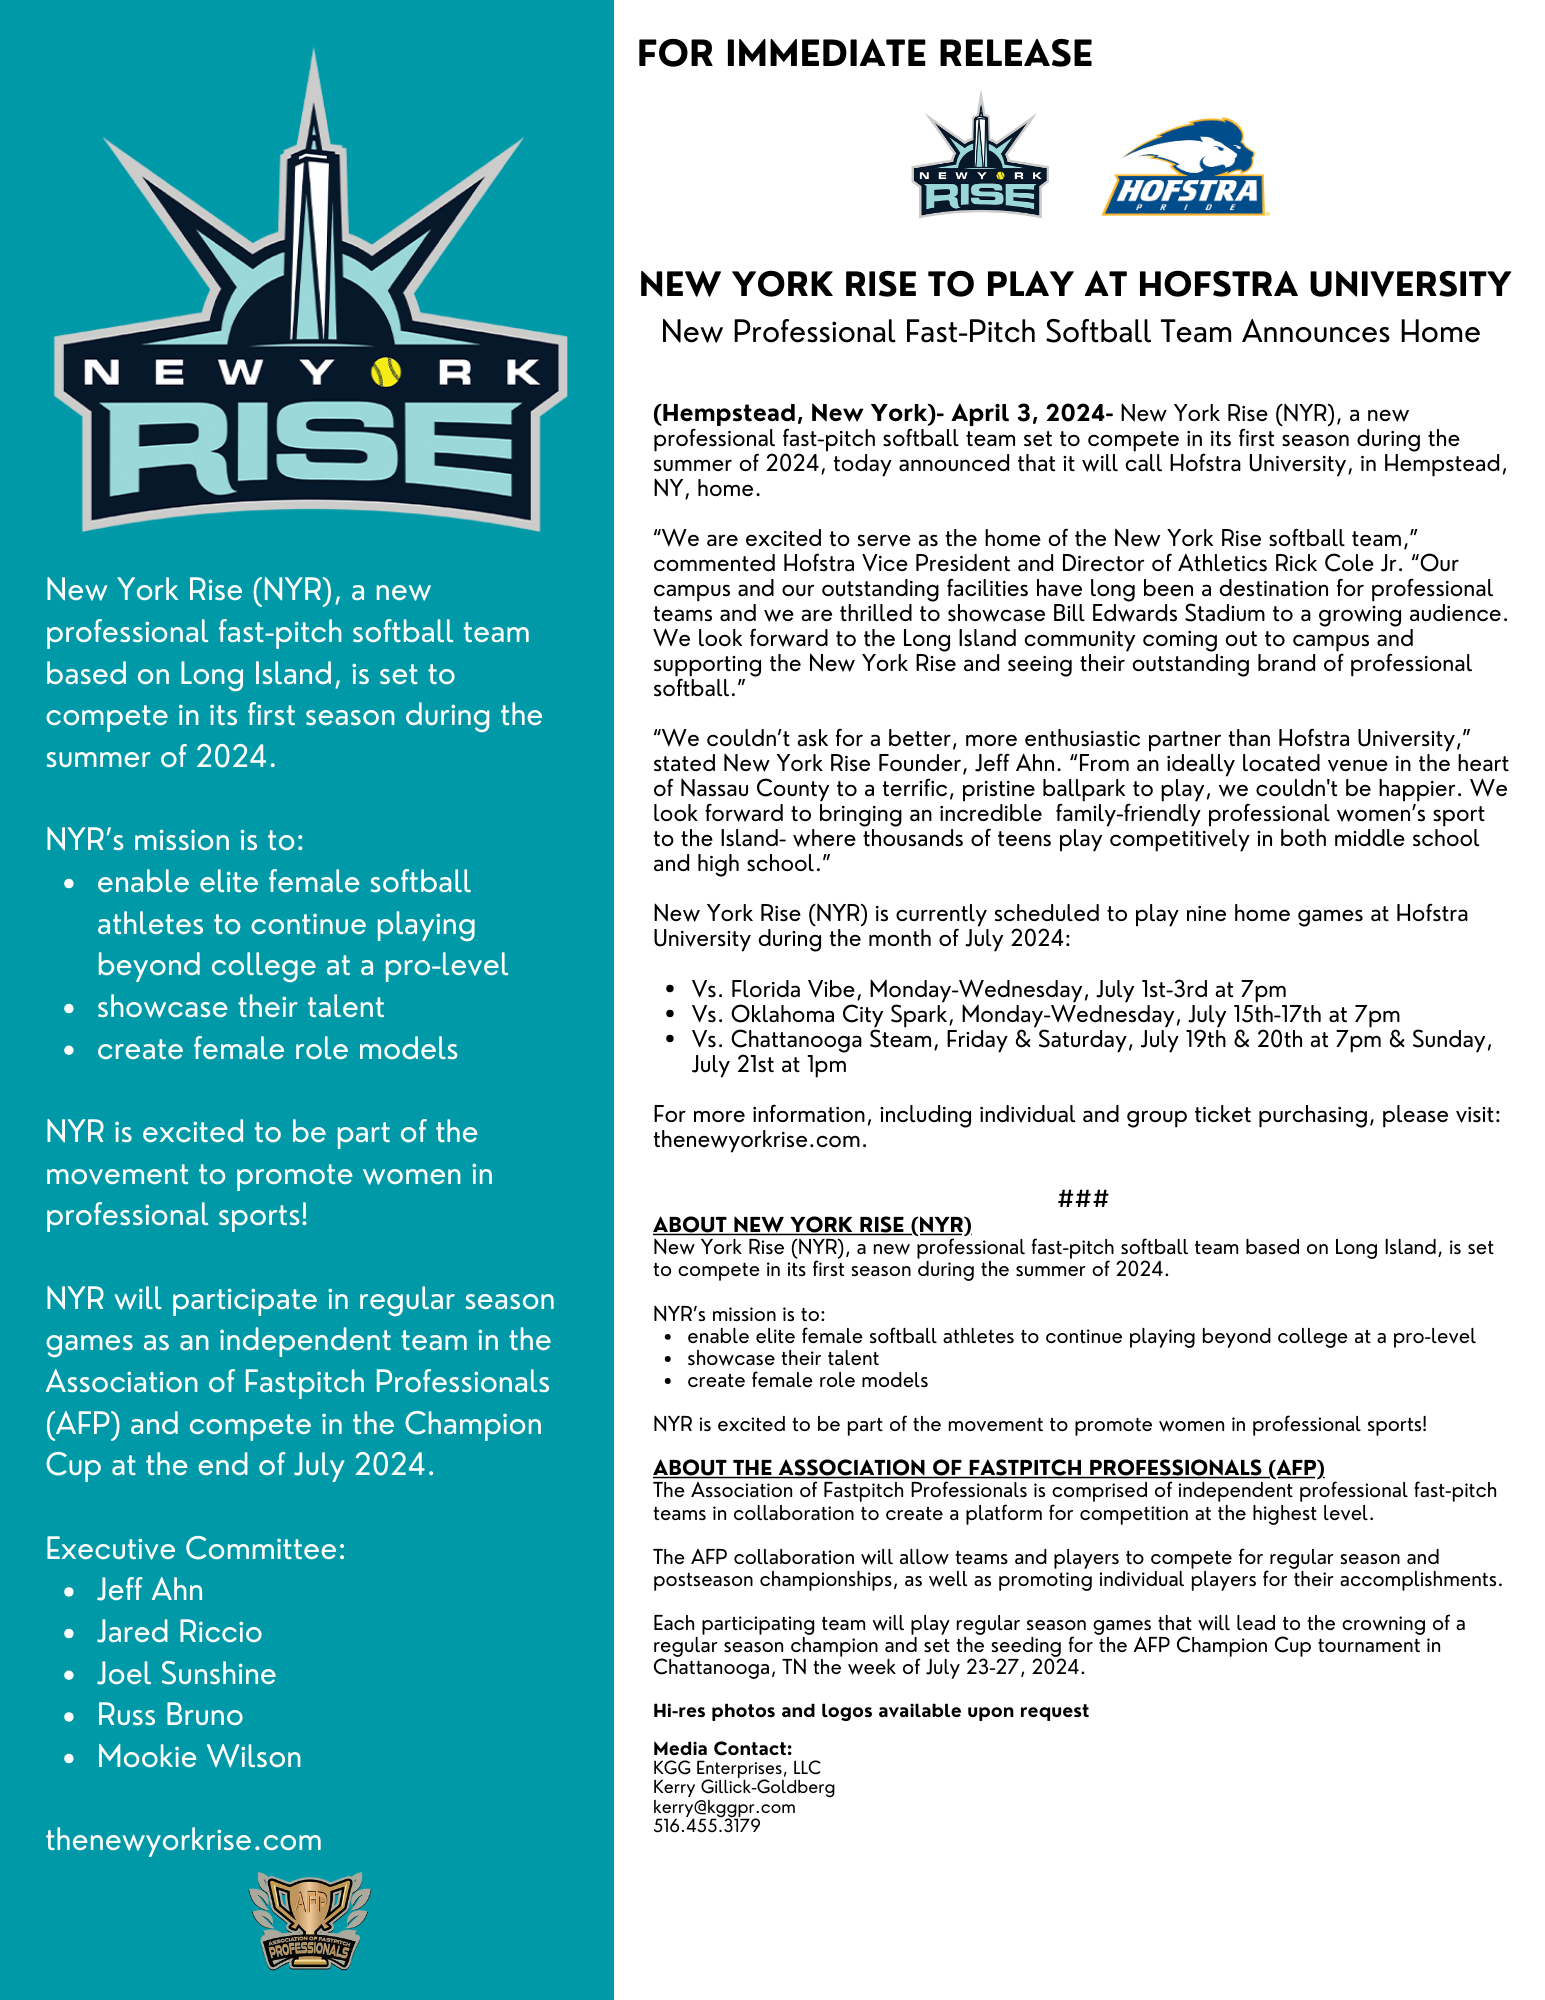 New York Rise to Play at Hofstra University